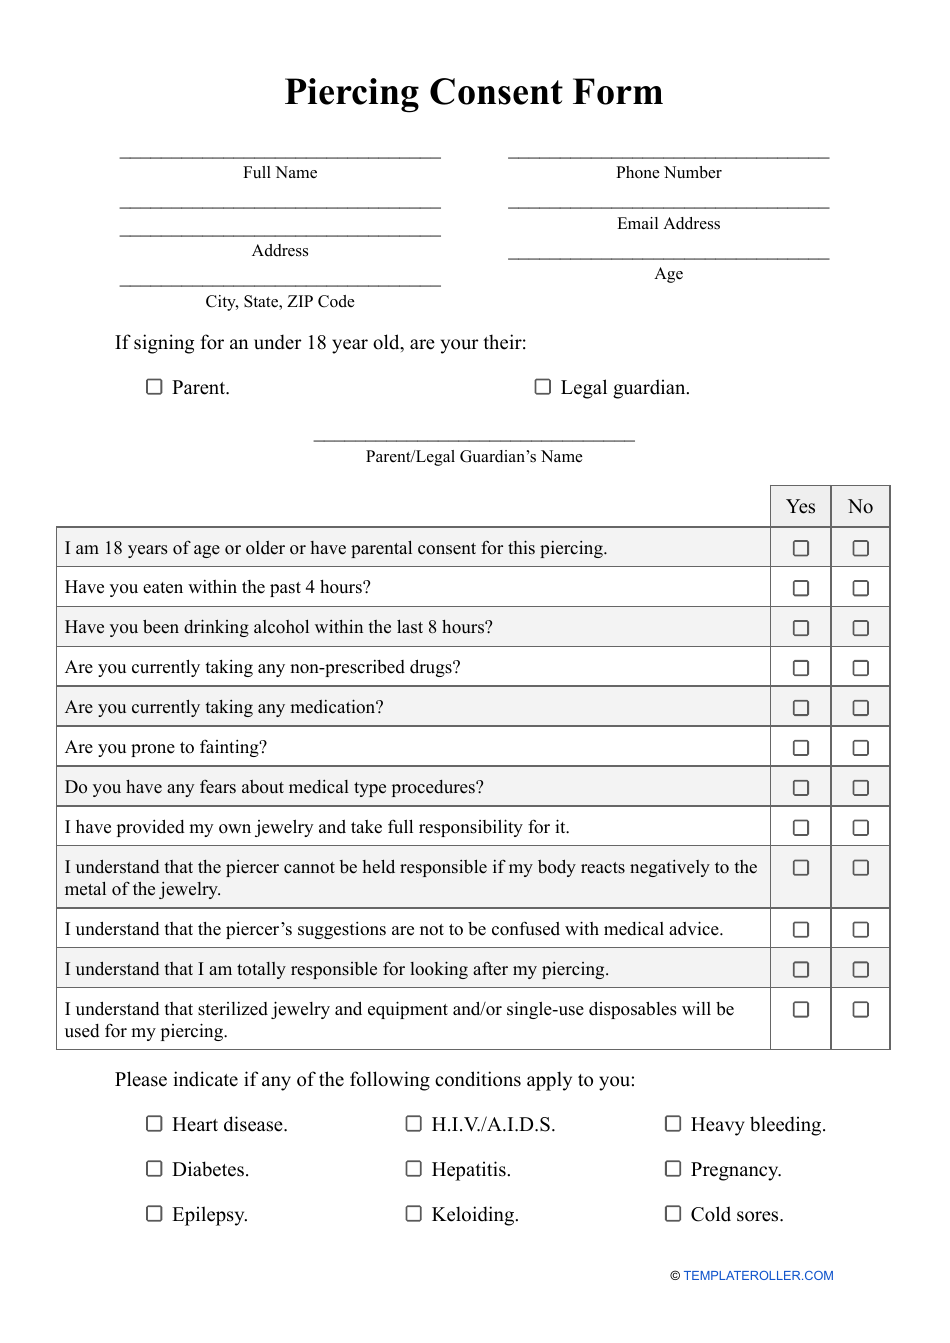 Piercing Consent Form, Page 1